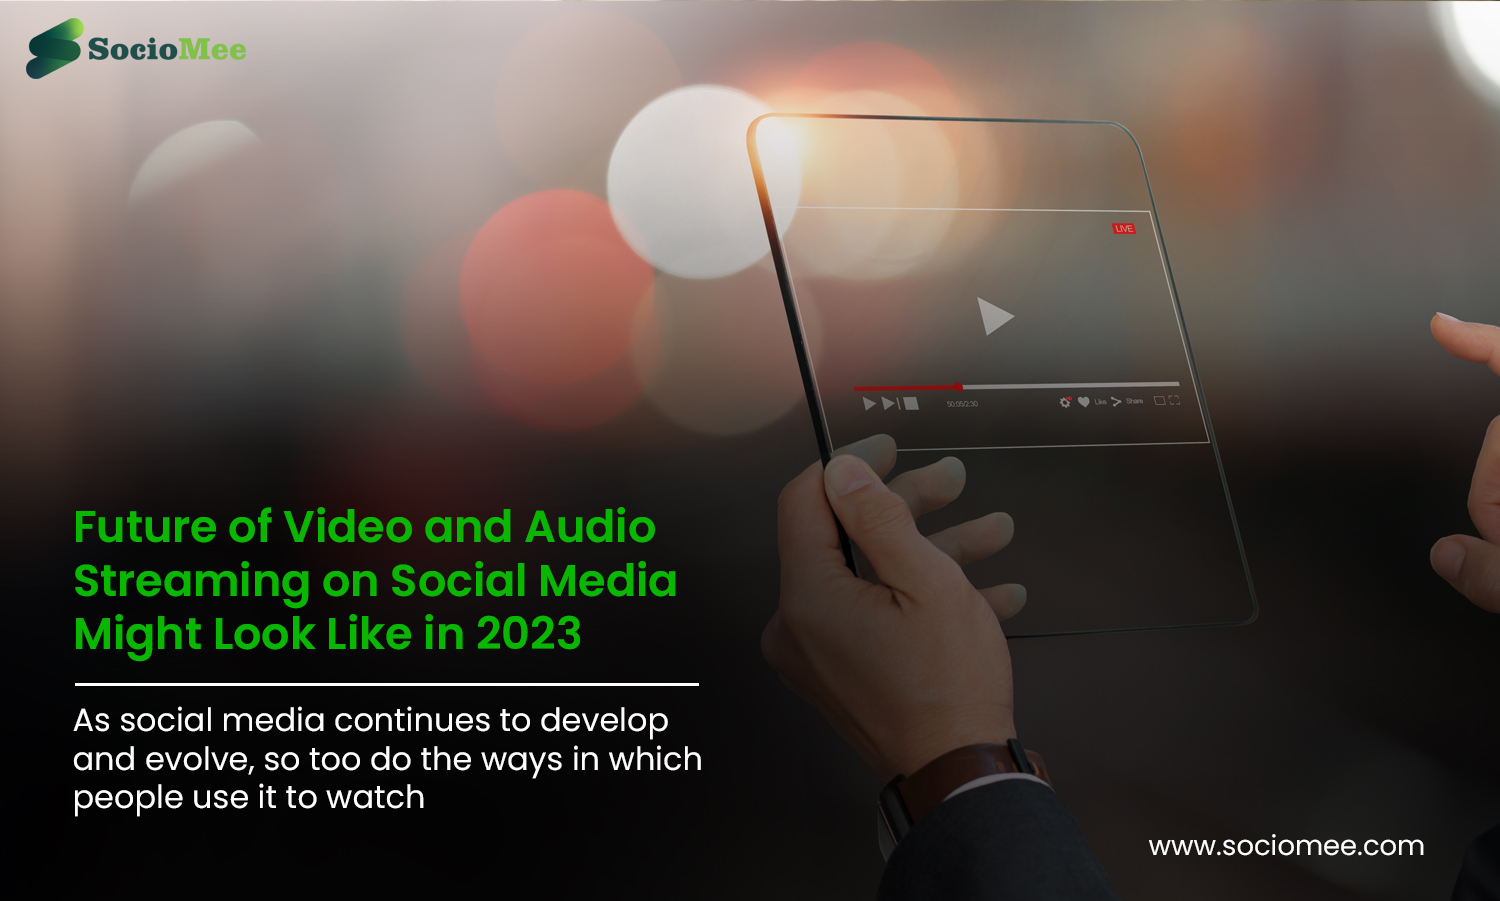 What the Future of Video and Audio Streaming on Social Media Might Look Like in 2023